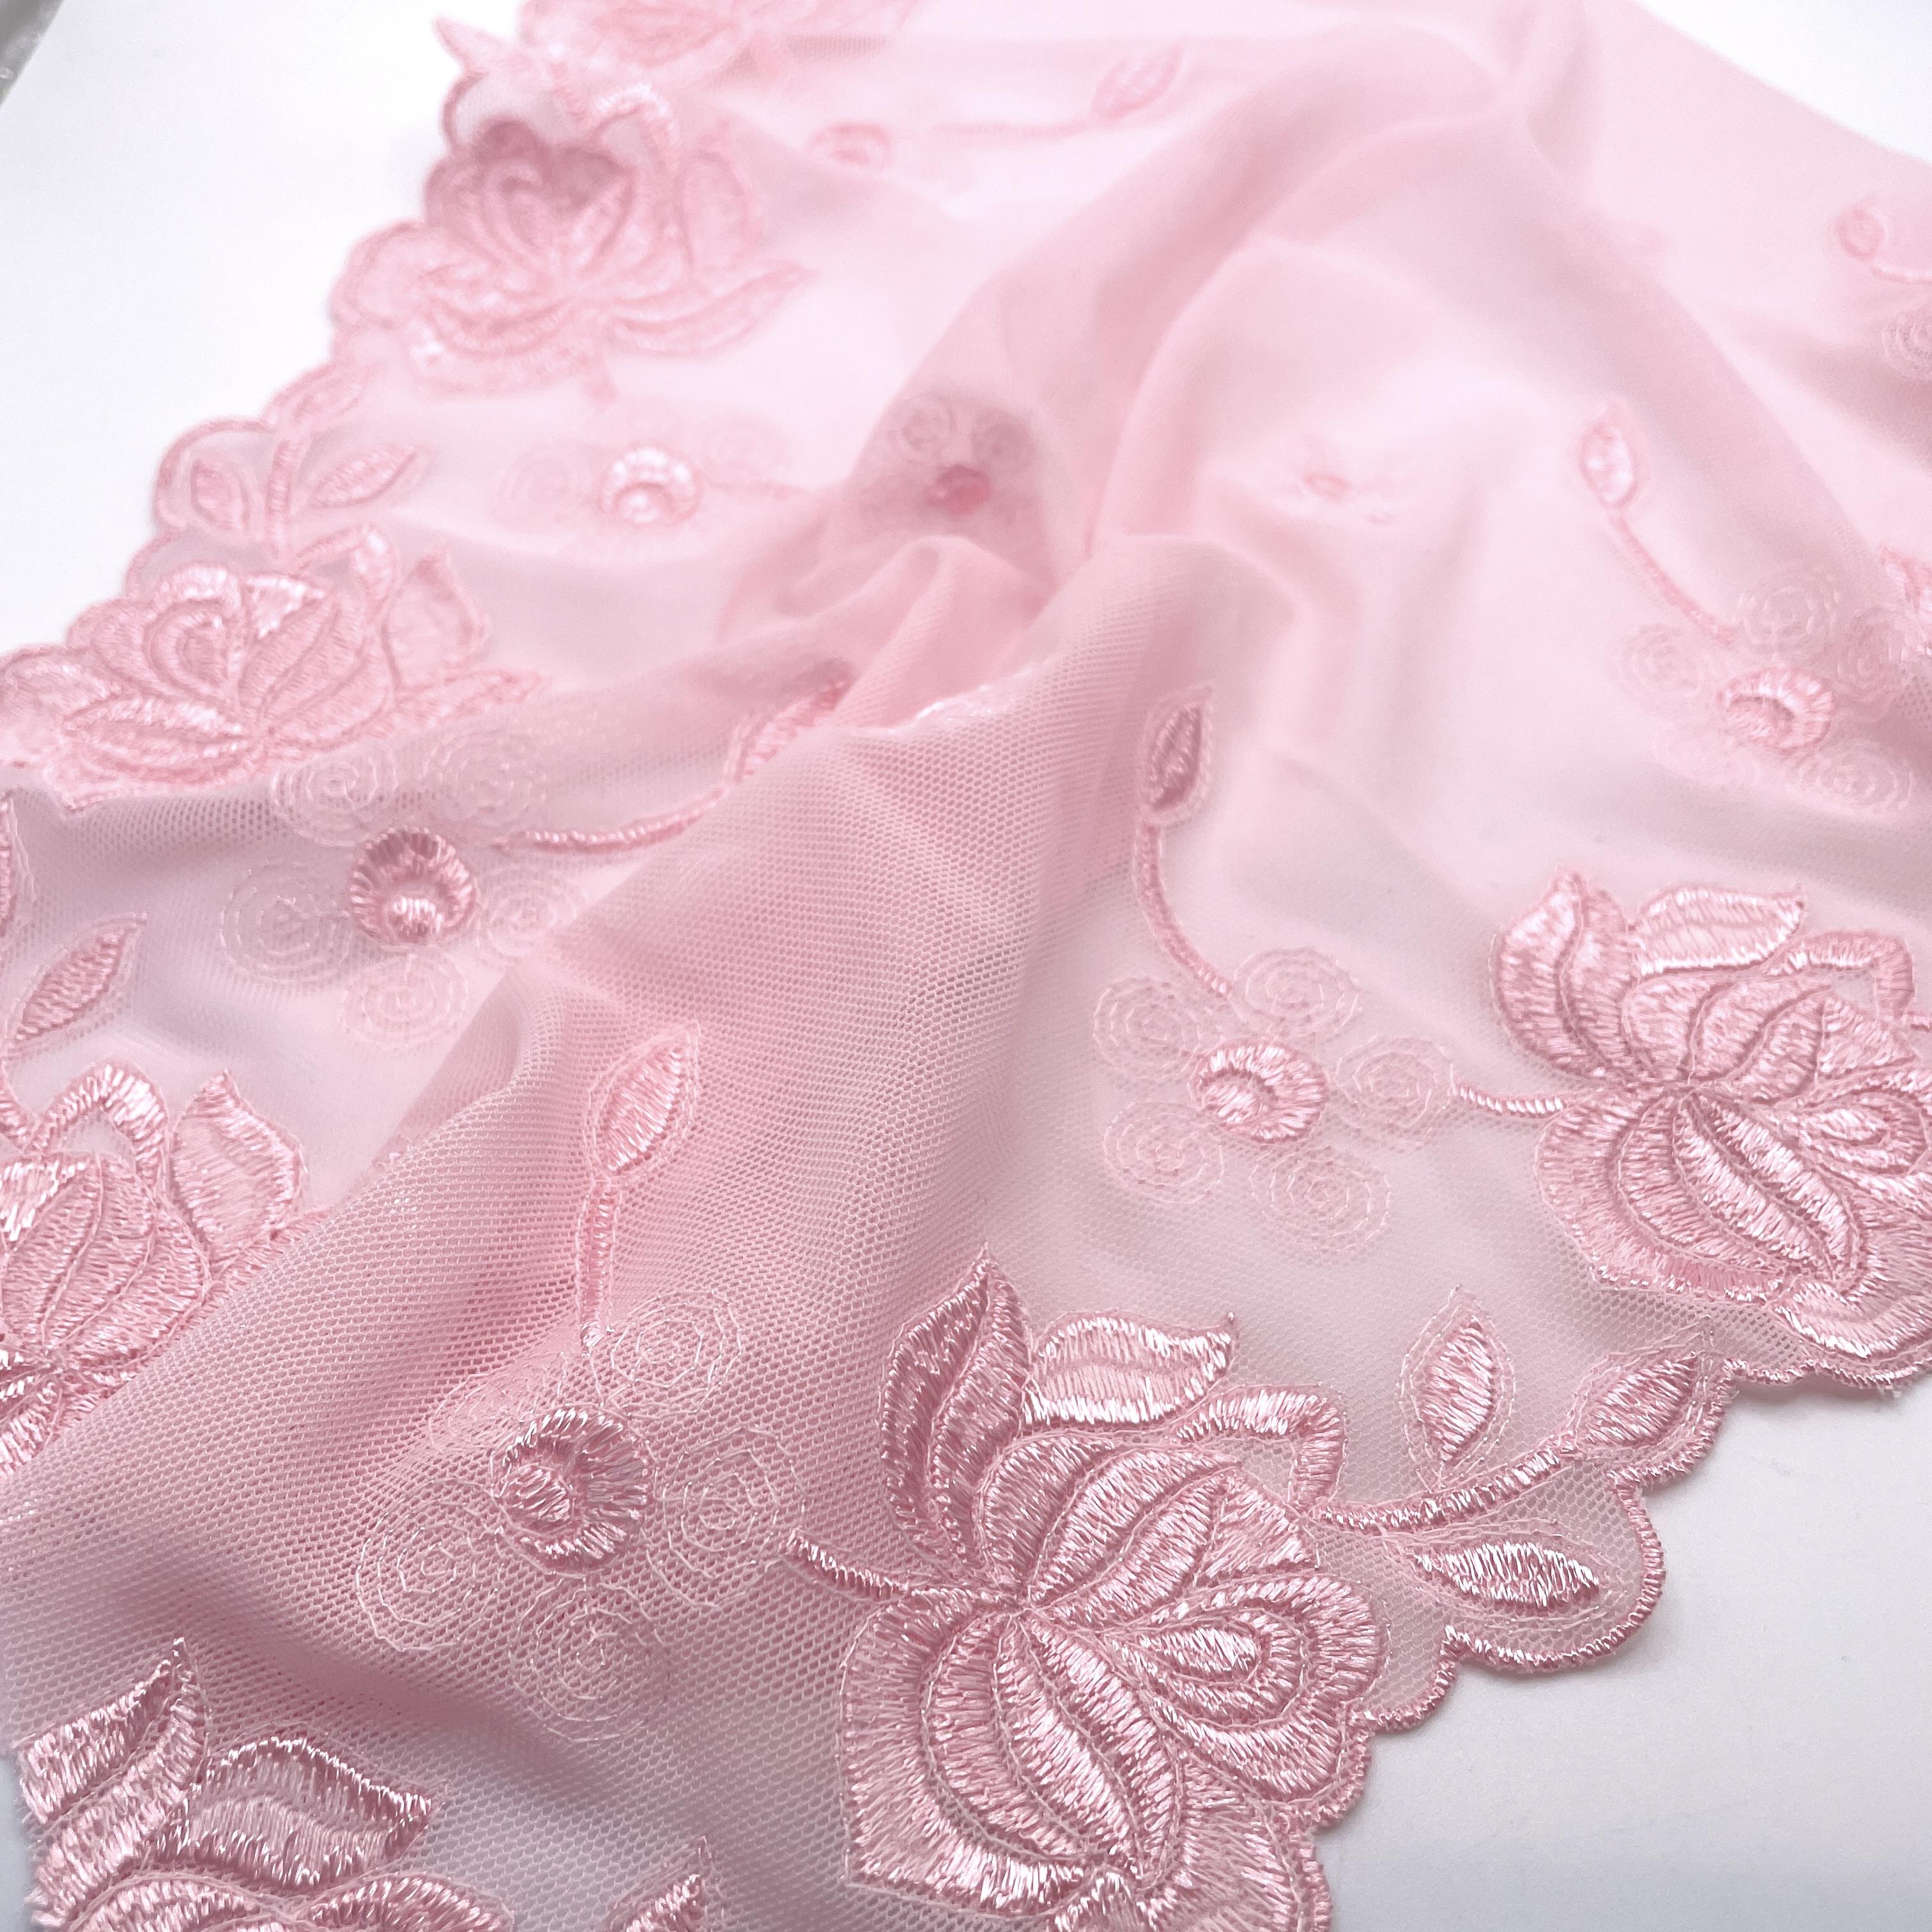 Lace Tulle - Rouen - Light PINK - Stretch - Twin Galloon - 28cm wide x ...